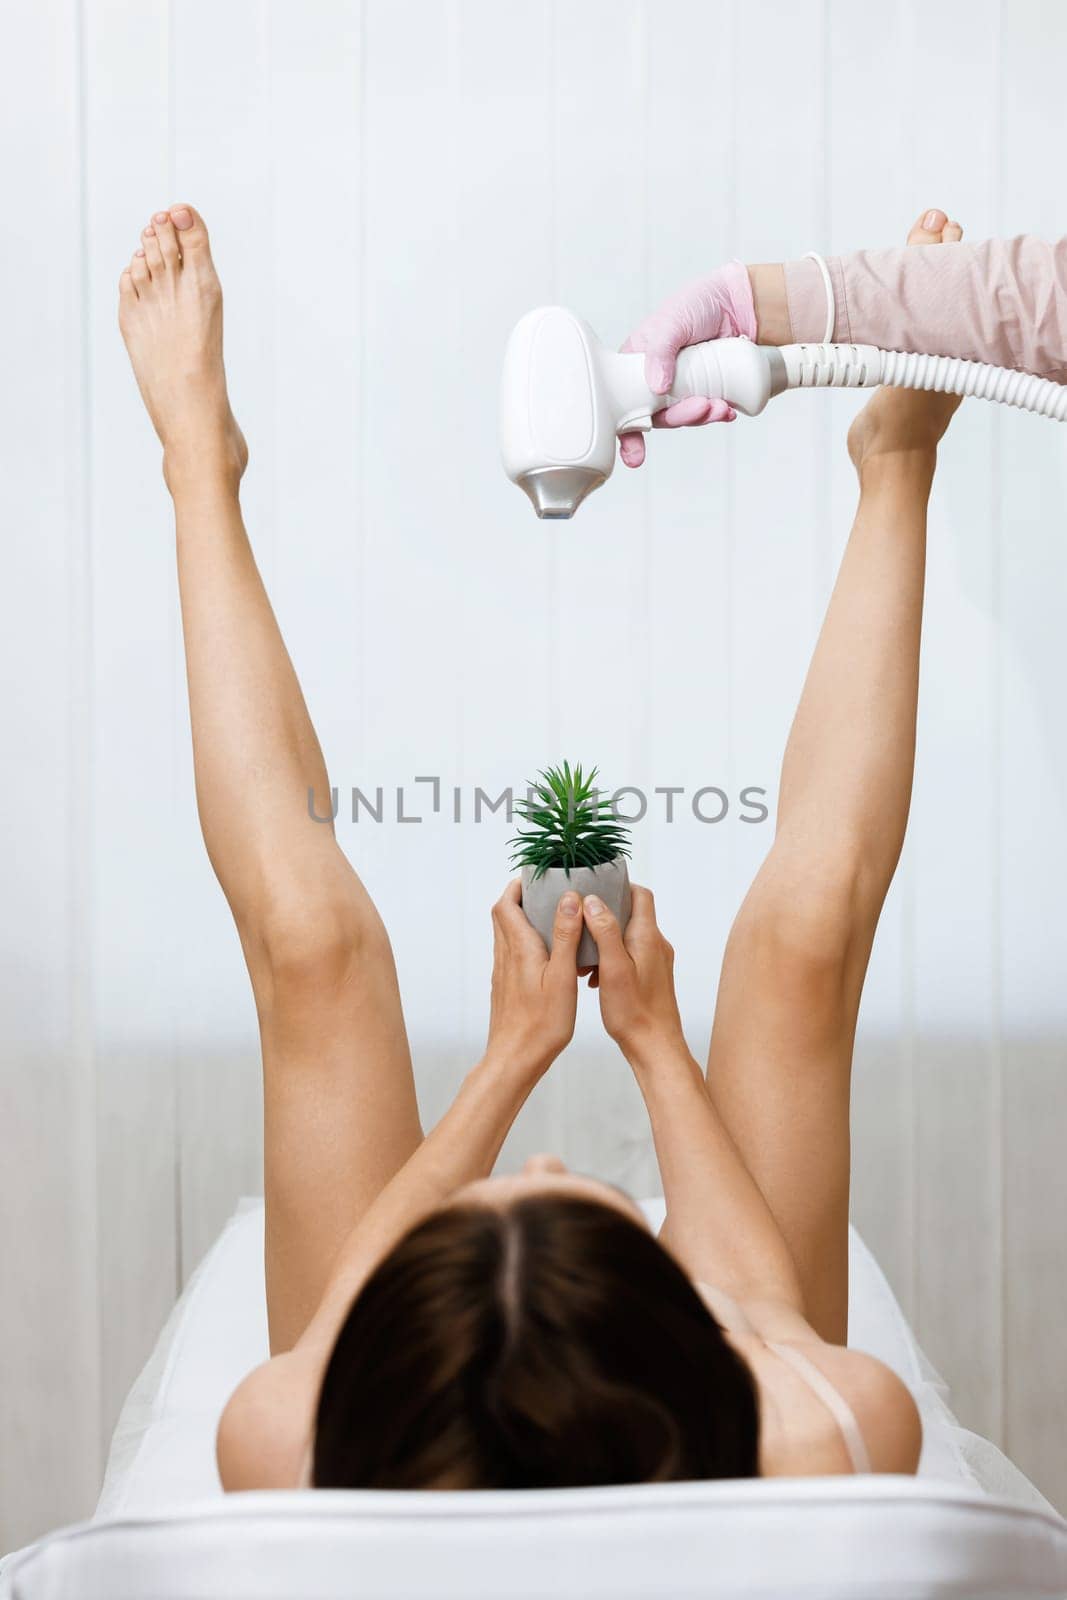 Bikini Laser hair removal. Woman lifted her beautiful long legs apart, holding a prickly plant between her legs. Hand holding laser gun of medical equipment. Concept of depilation and epilation by uflypro